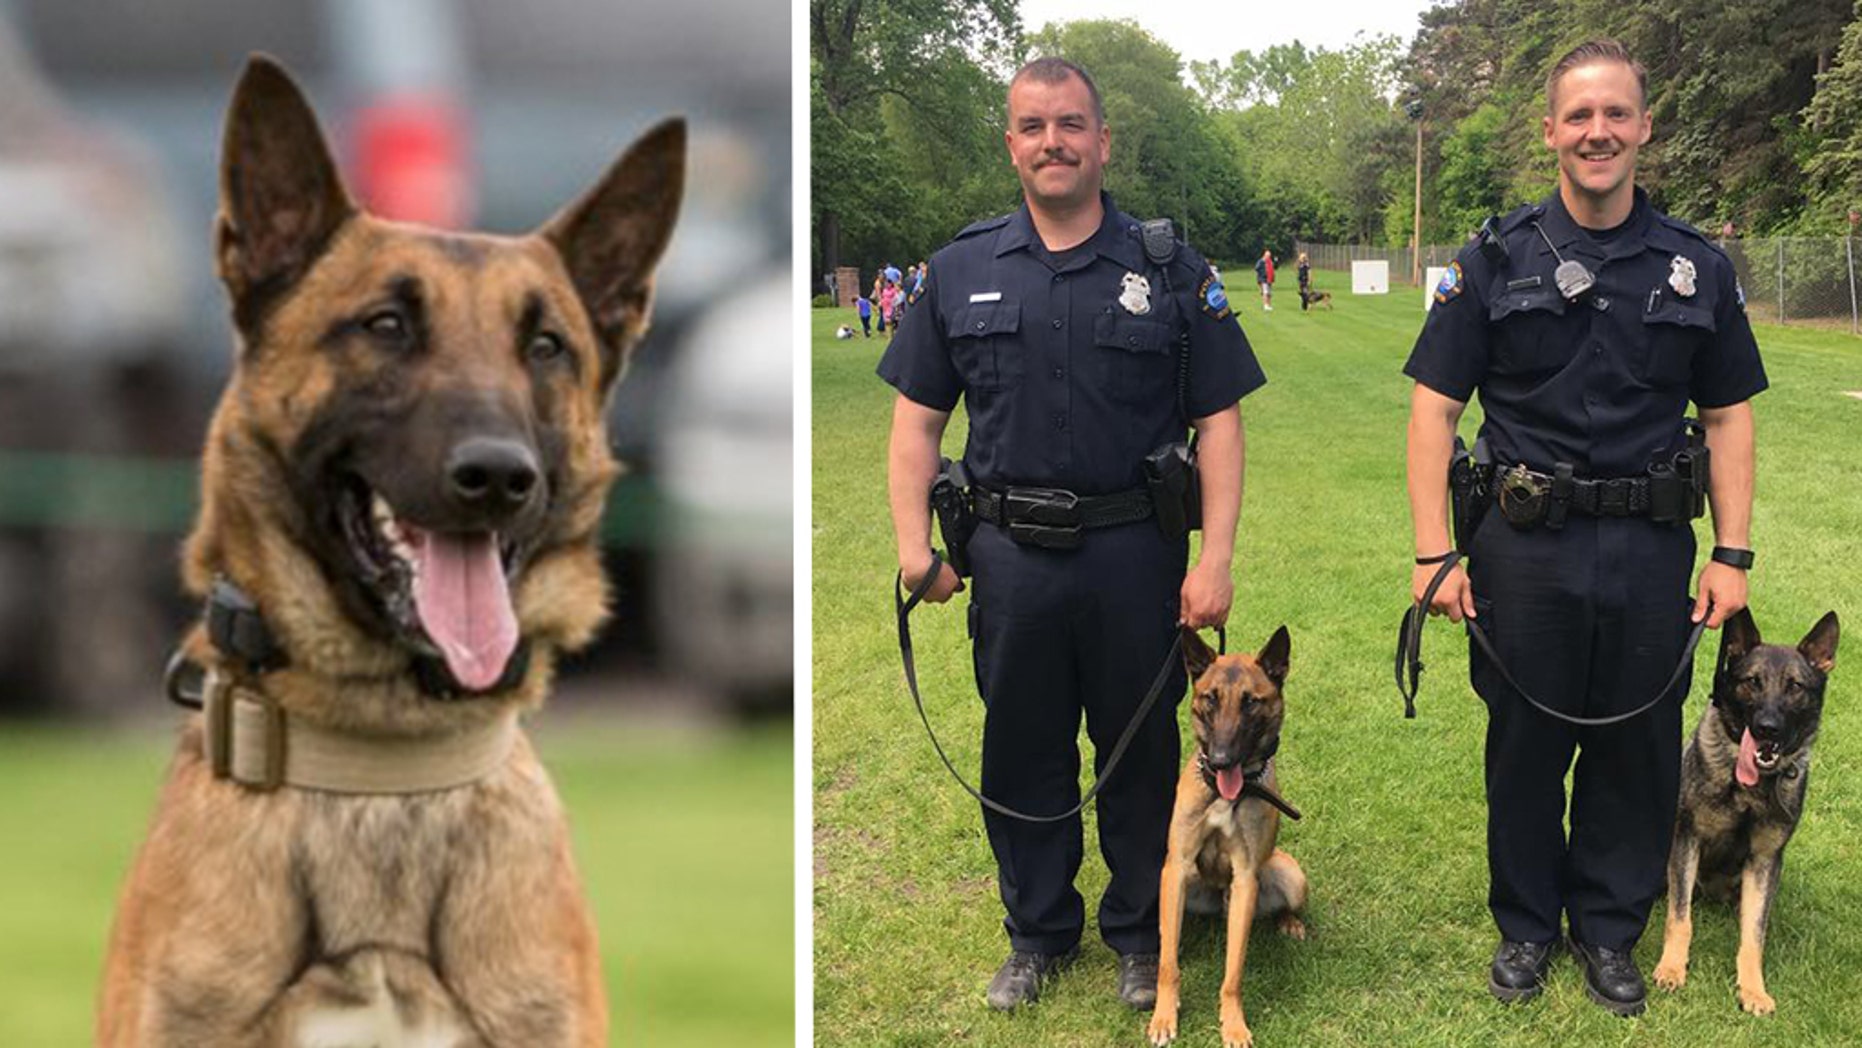 Michigan officer wounded, K-9 killed in shoot-out with suspect